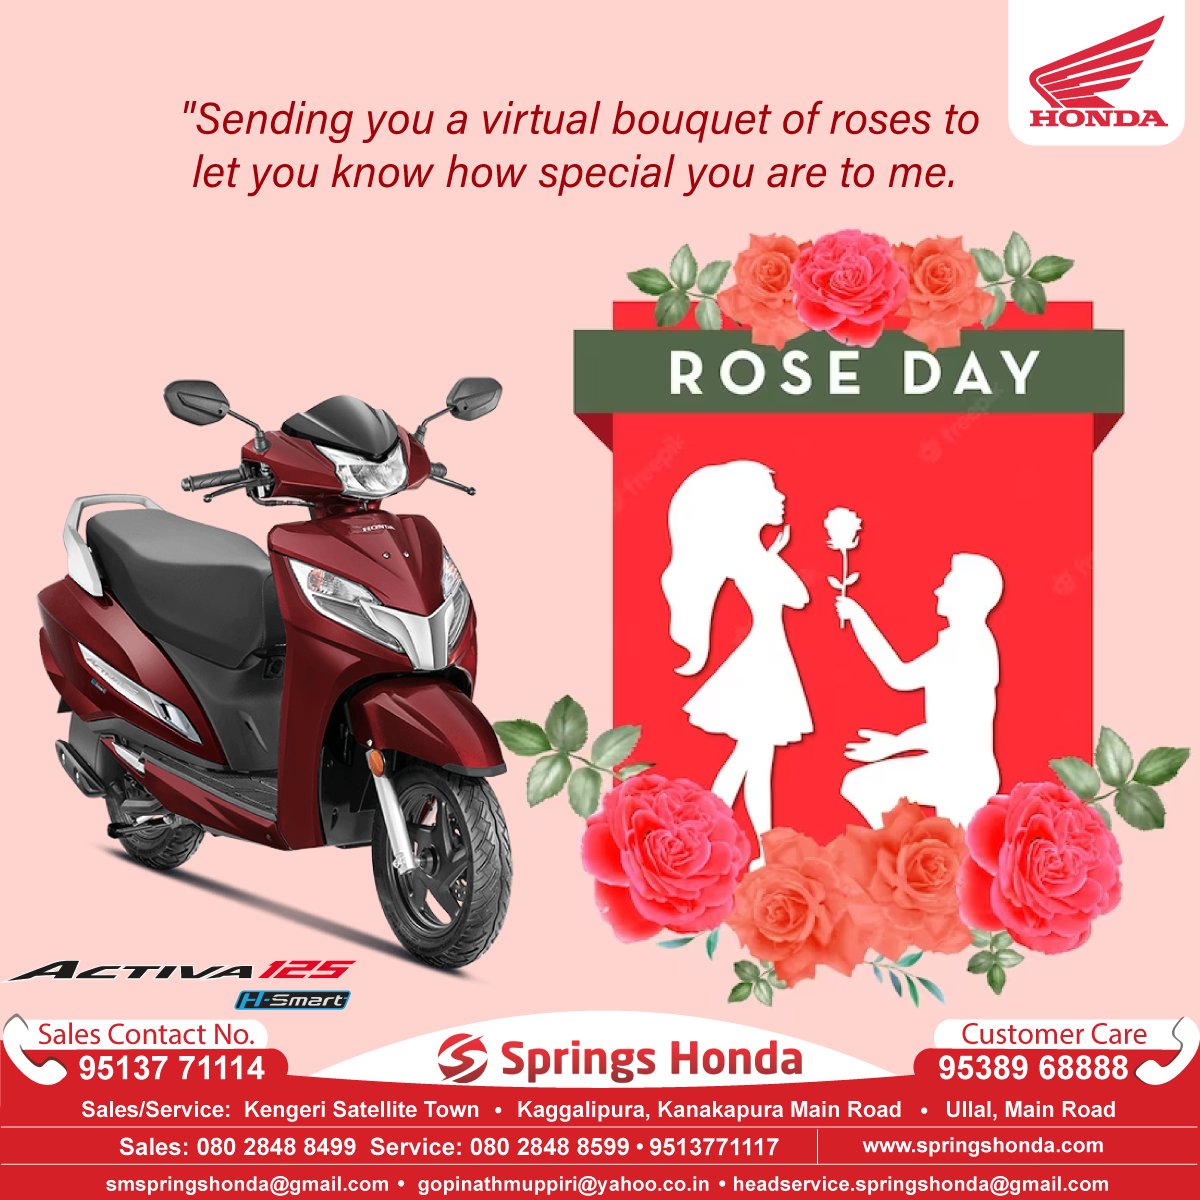 🌹Sending virtual blooms your way to celebrate the special bond we share. Happy Rose Day! 🌹 #SpecialConnection #RoseDay
To know more, please visit:
springshonda.com
📲08028488499
#SpringsHonda  #RoseDay 🌹 #LoveBlooms #ValentinesWeek #RedRoses #RomanticFlowers